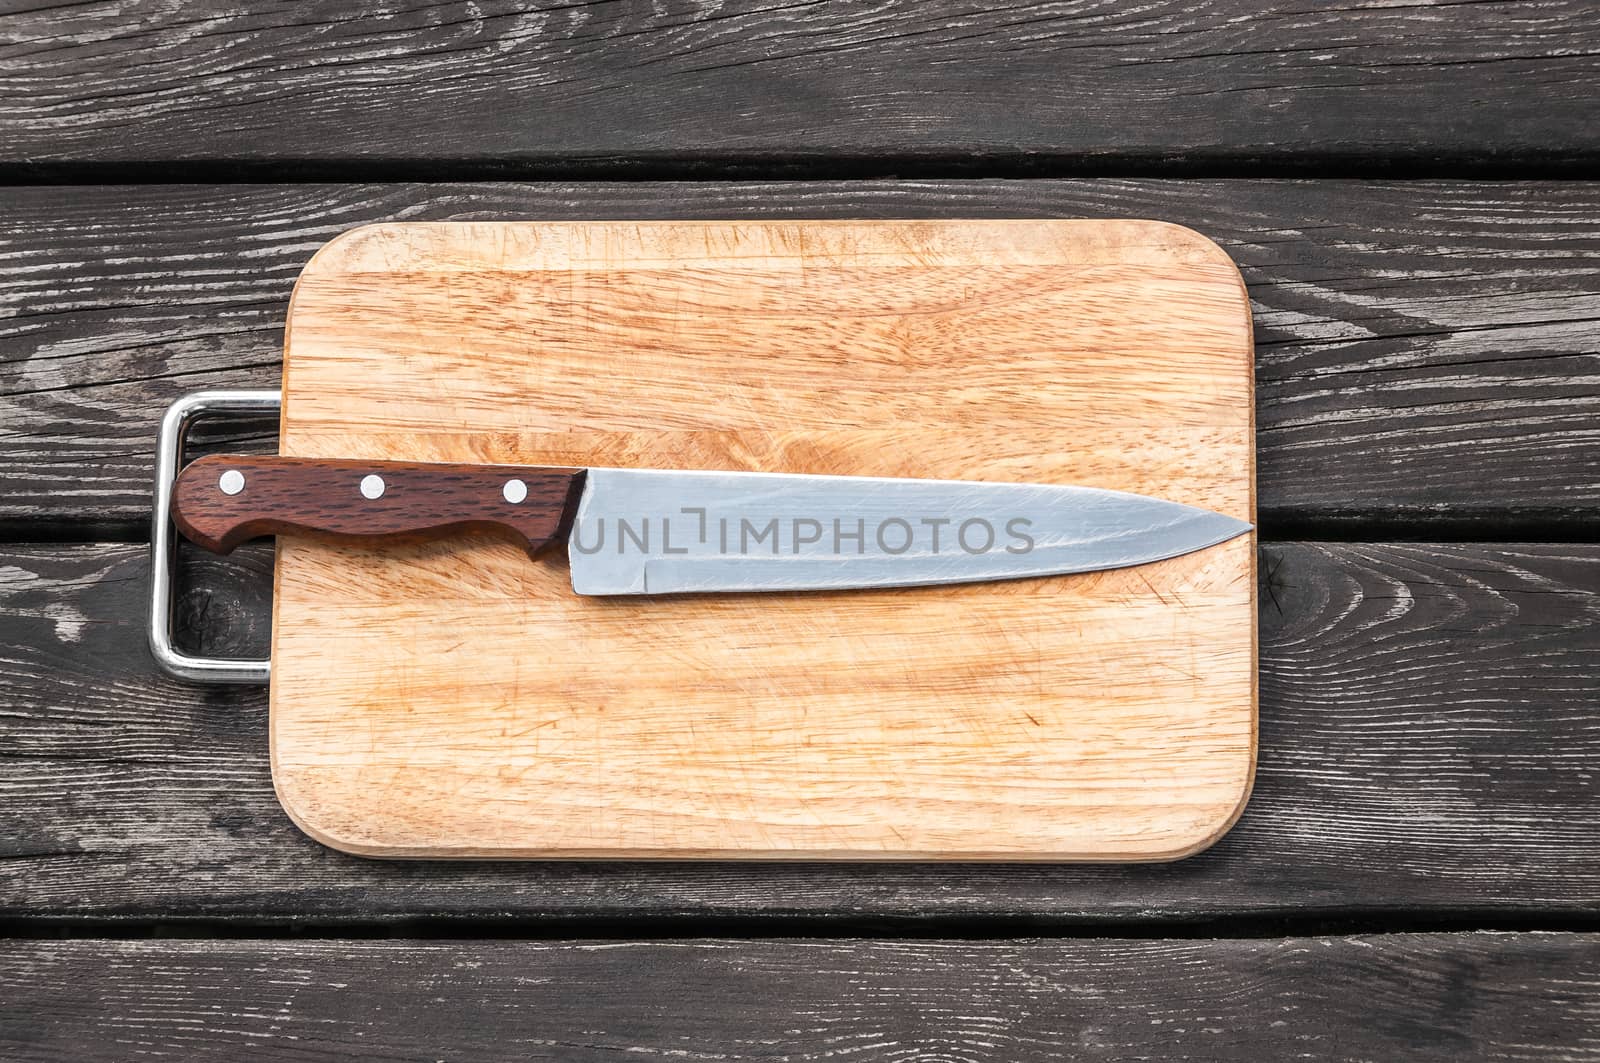 Steel knife on a cutting board on wooden background with